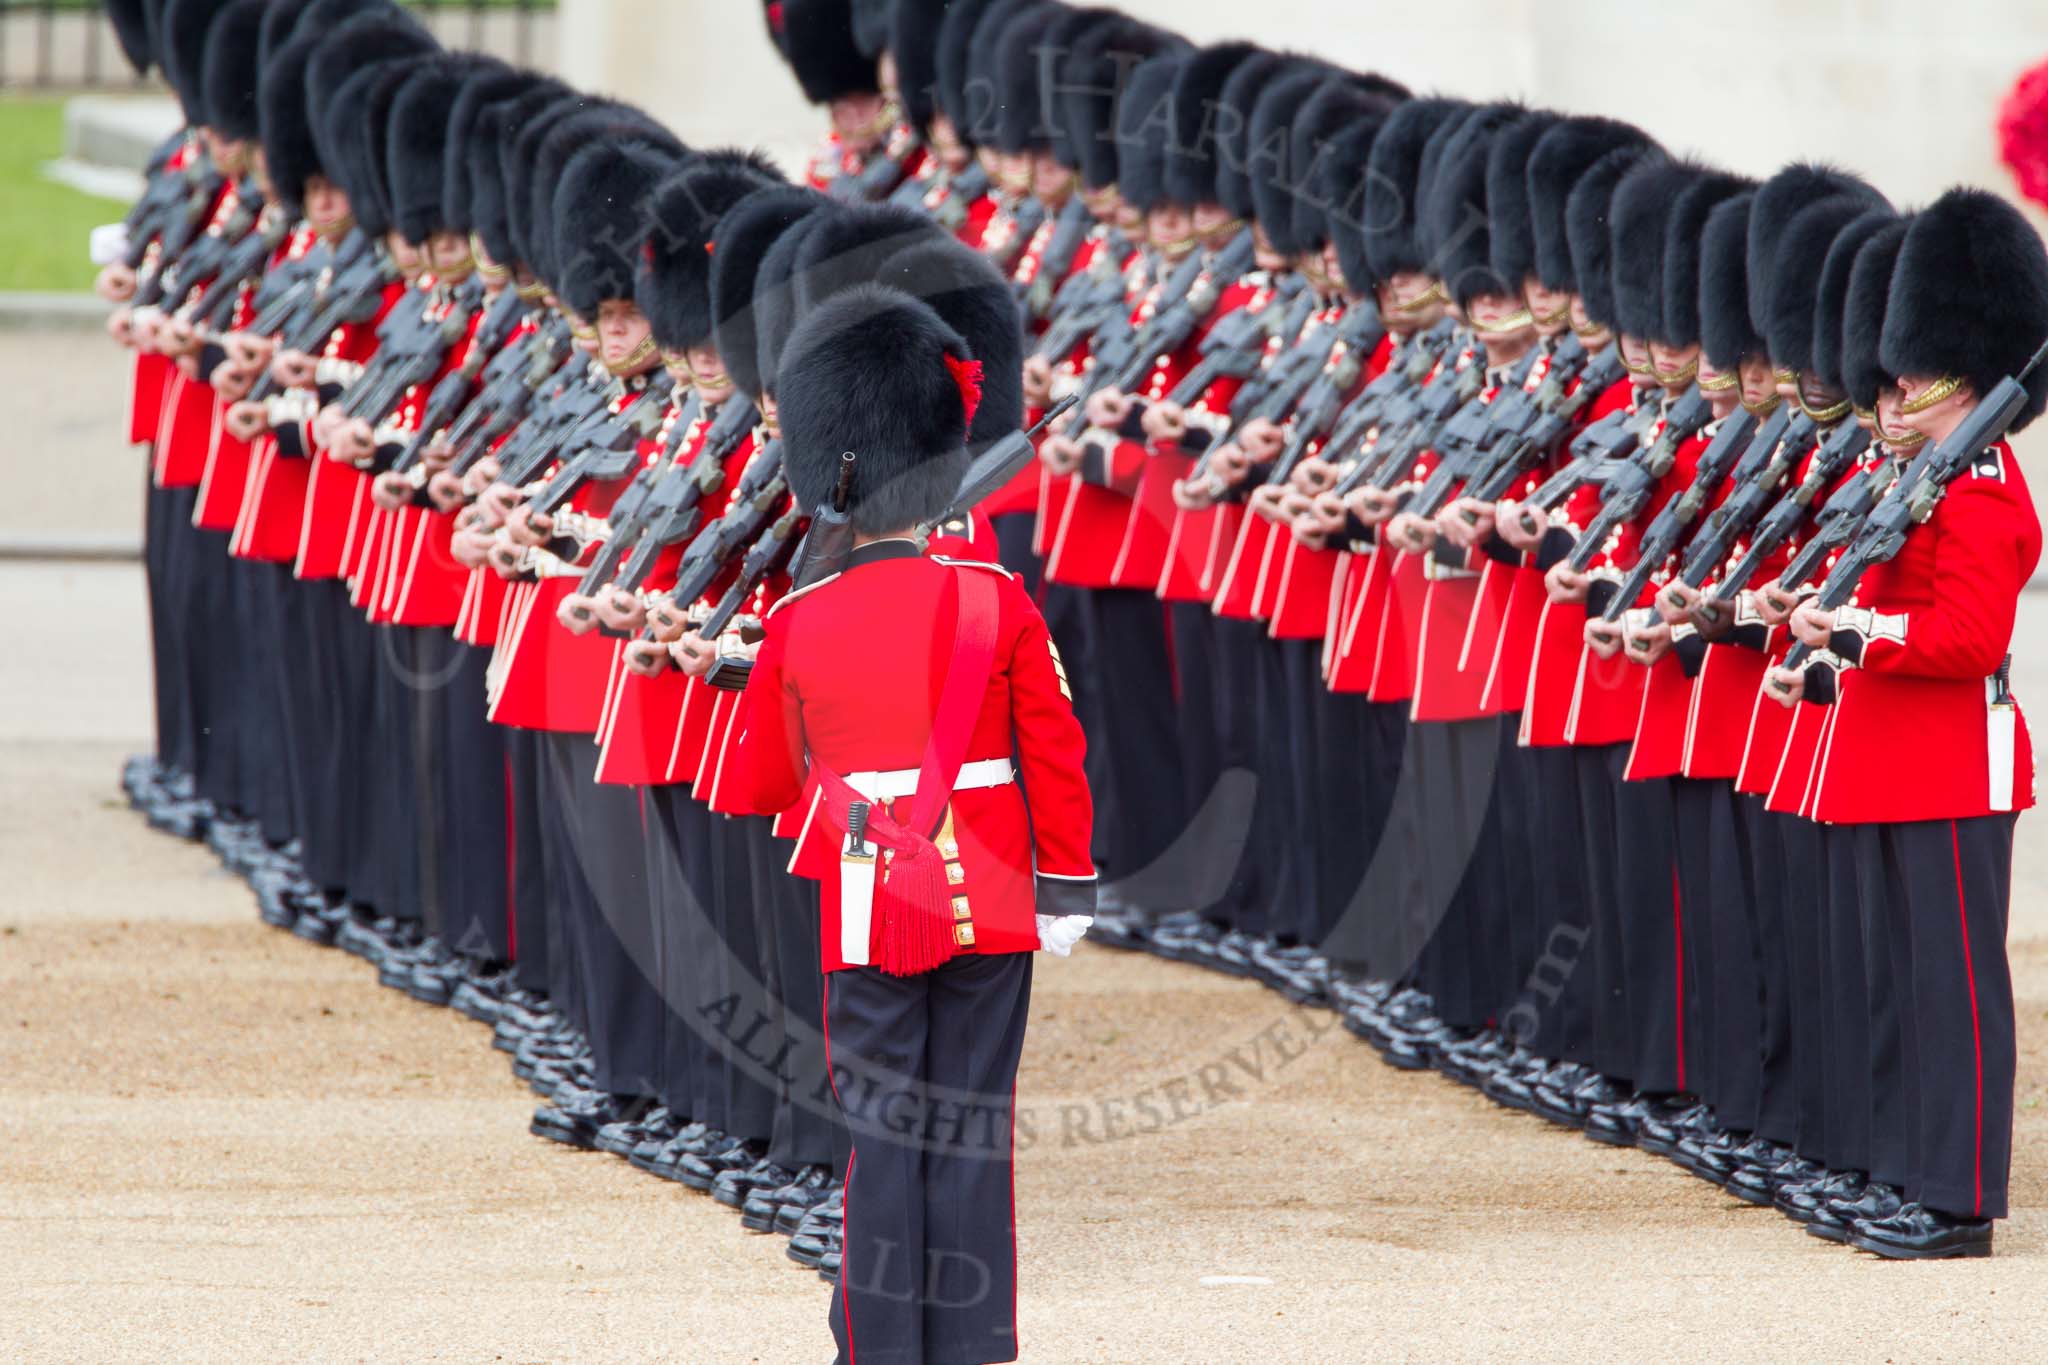 The Colonel's Review 2012: A Colour Sergeant of the Coldstream Guards inspecting the lines of guardsmen..
Horse Guards Parade, Westminster,
London SW1,

United Kingdom,
on 09 June 2012 at 10:31, image #84